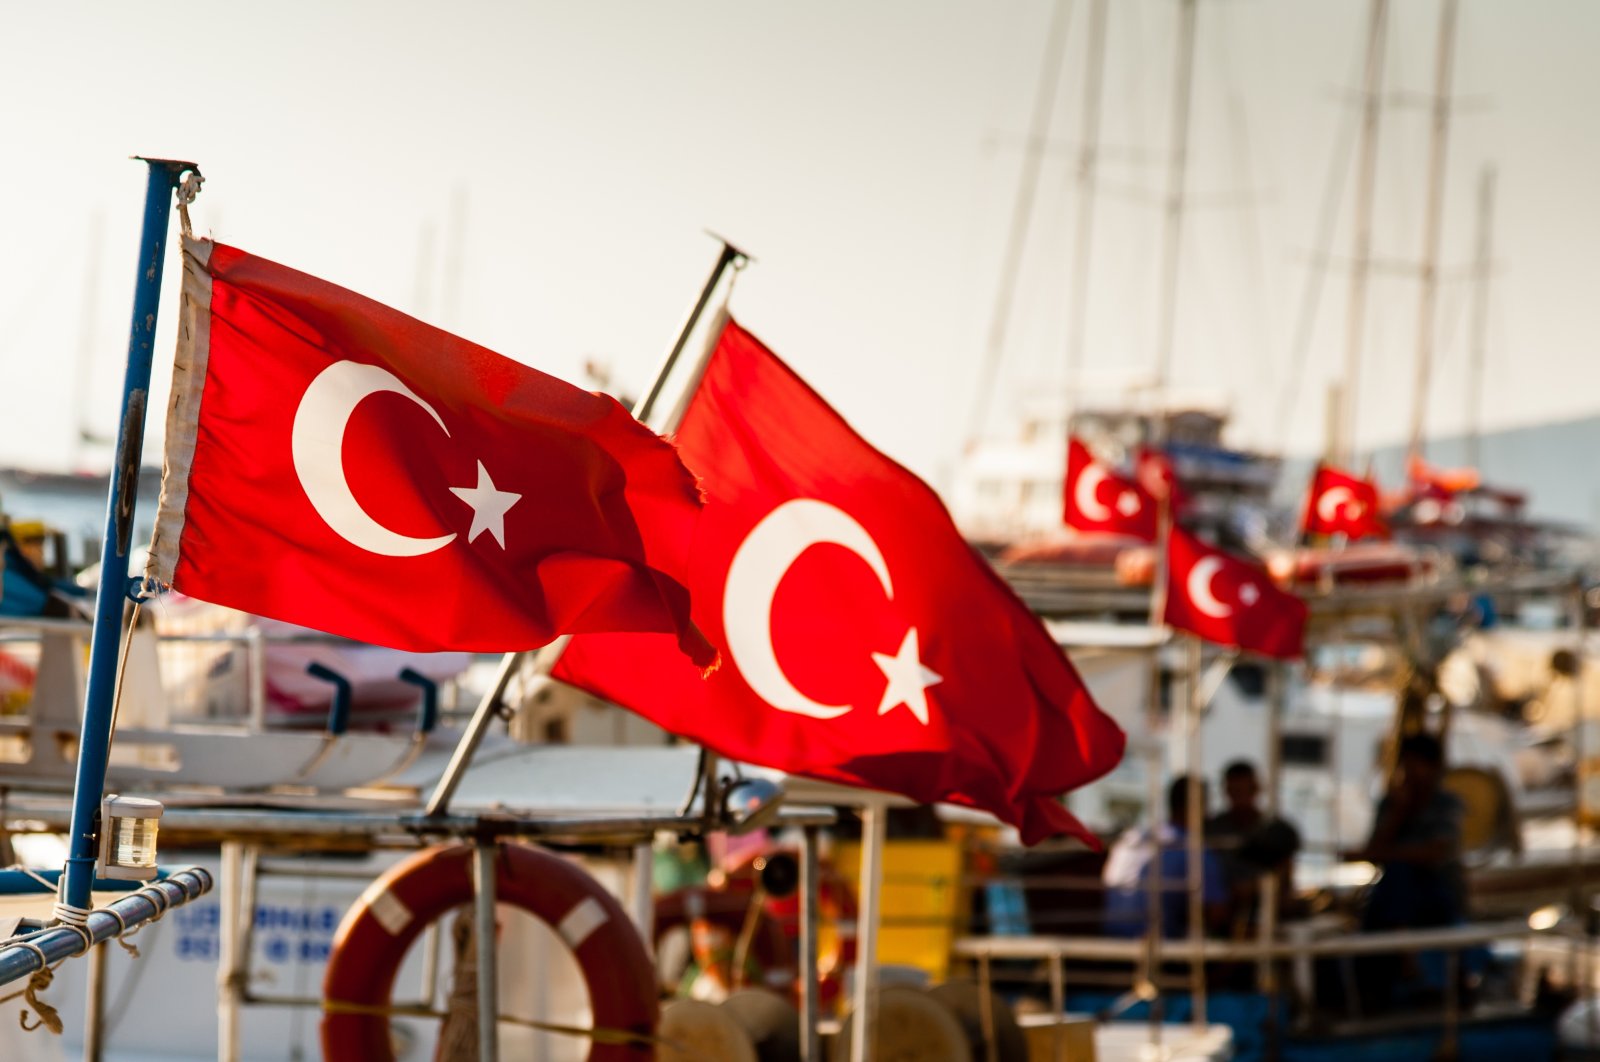 Turkish flags on boats moored in Bodrum, Turkey. (Shutterstock Photo)